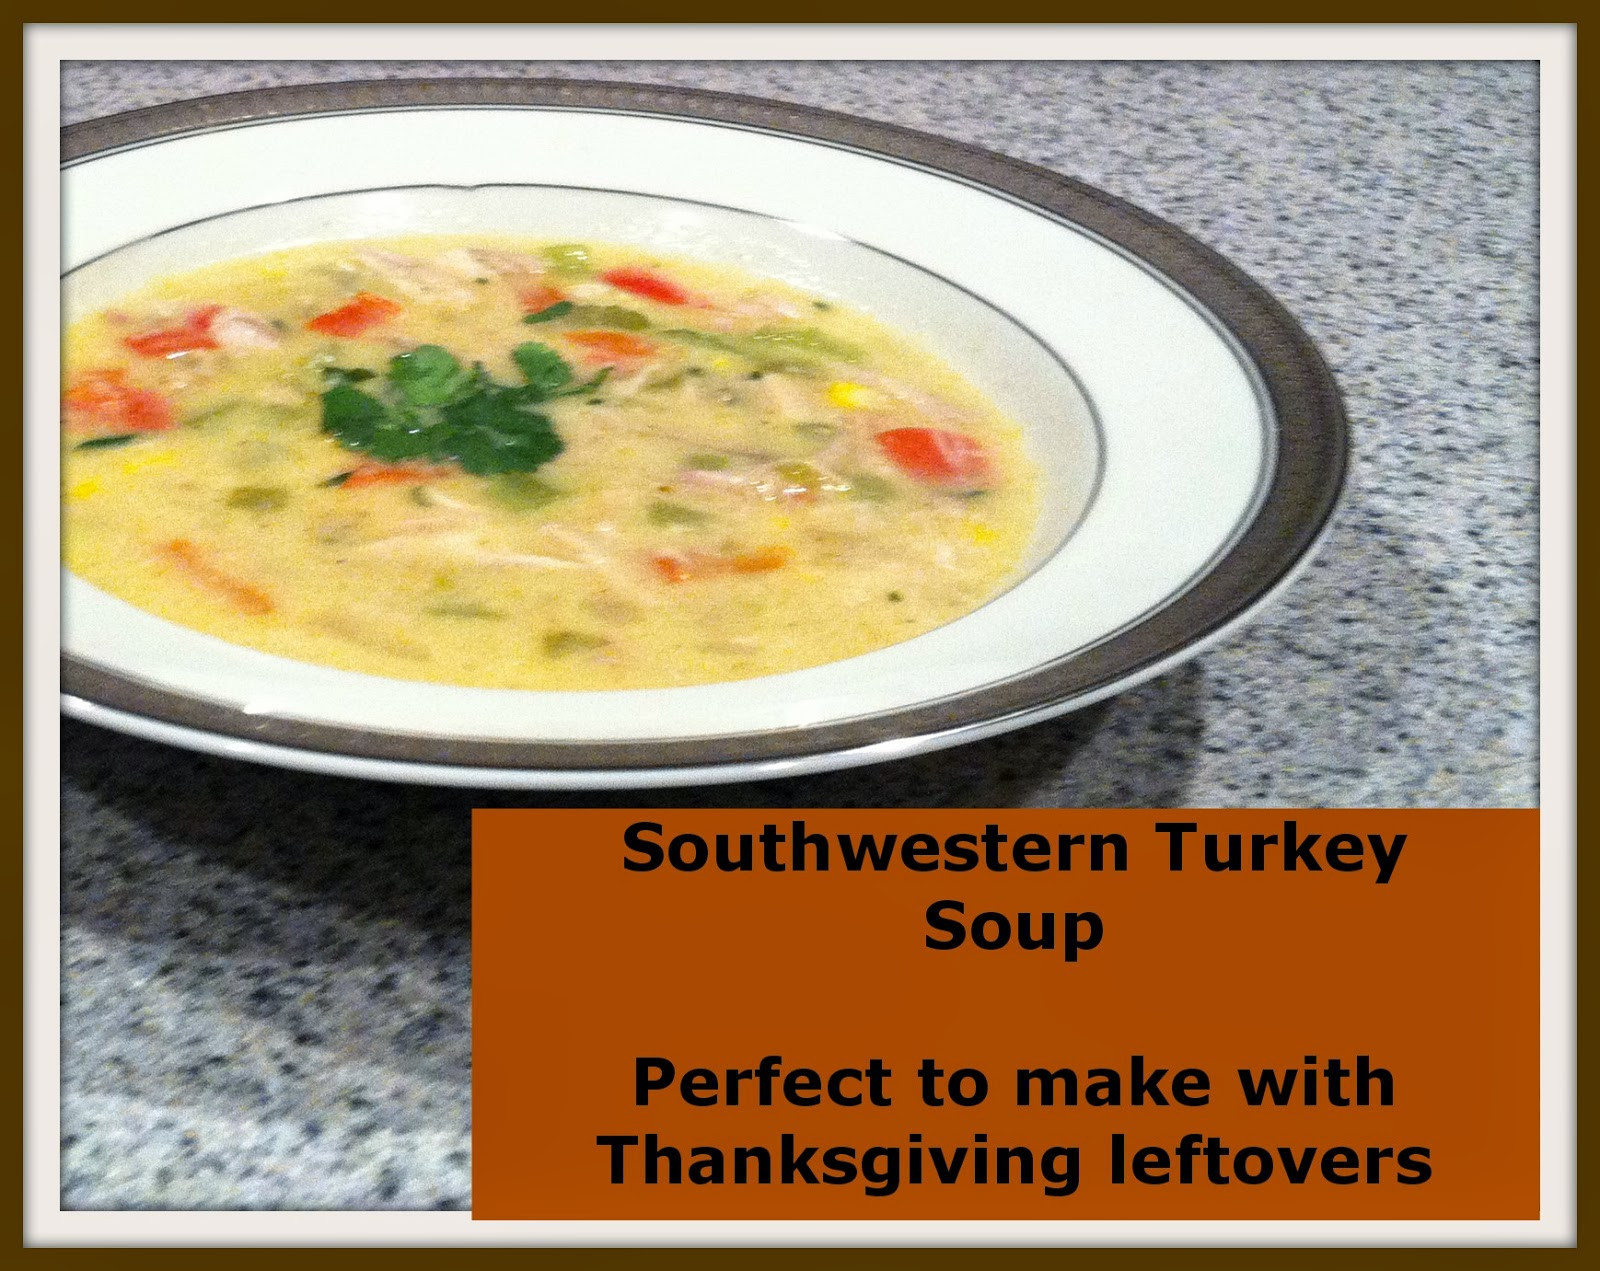 Turkey Soup From Thanksgiving Leftovers
 twingle mommmy Southwestern Turkey Soup Recipe Perfect